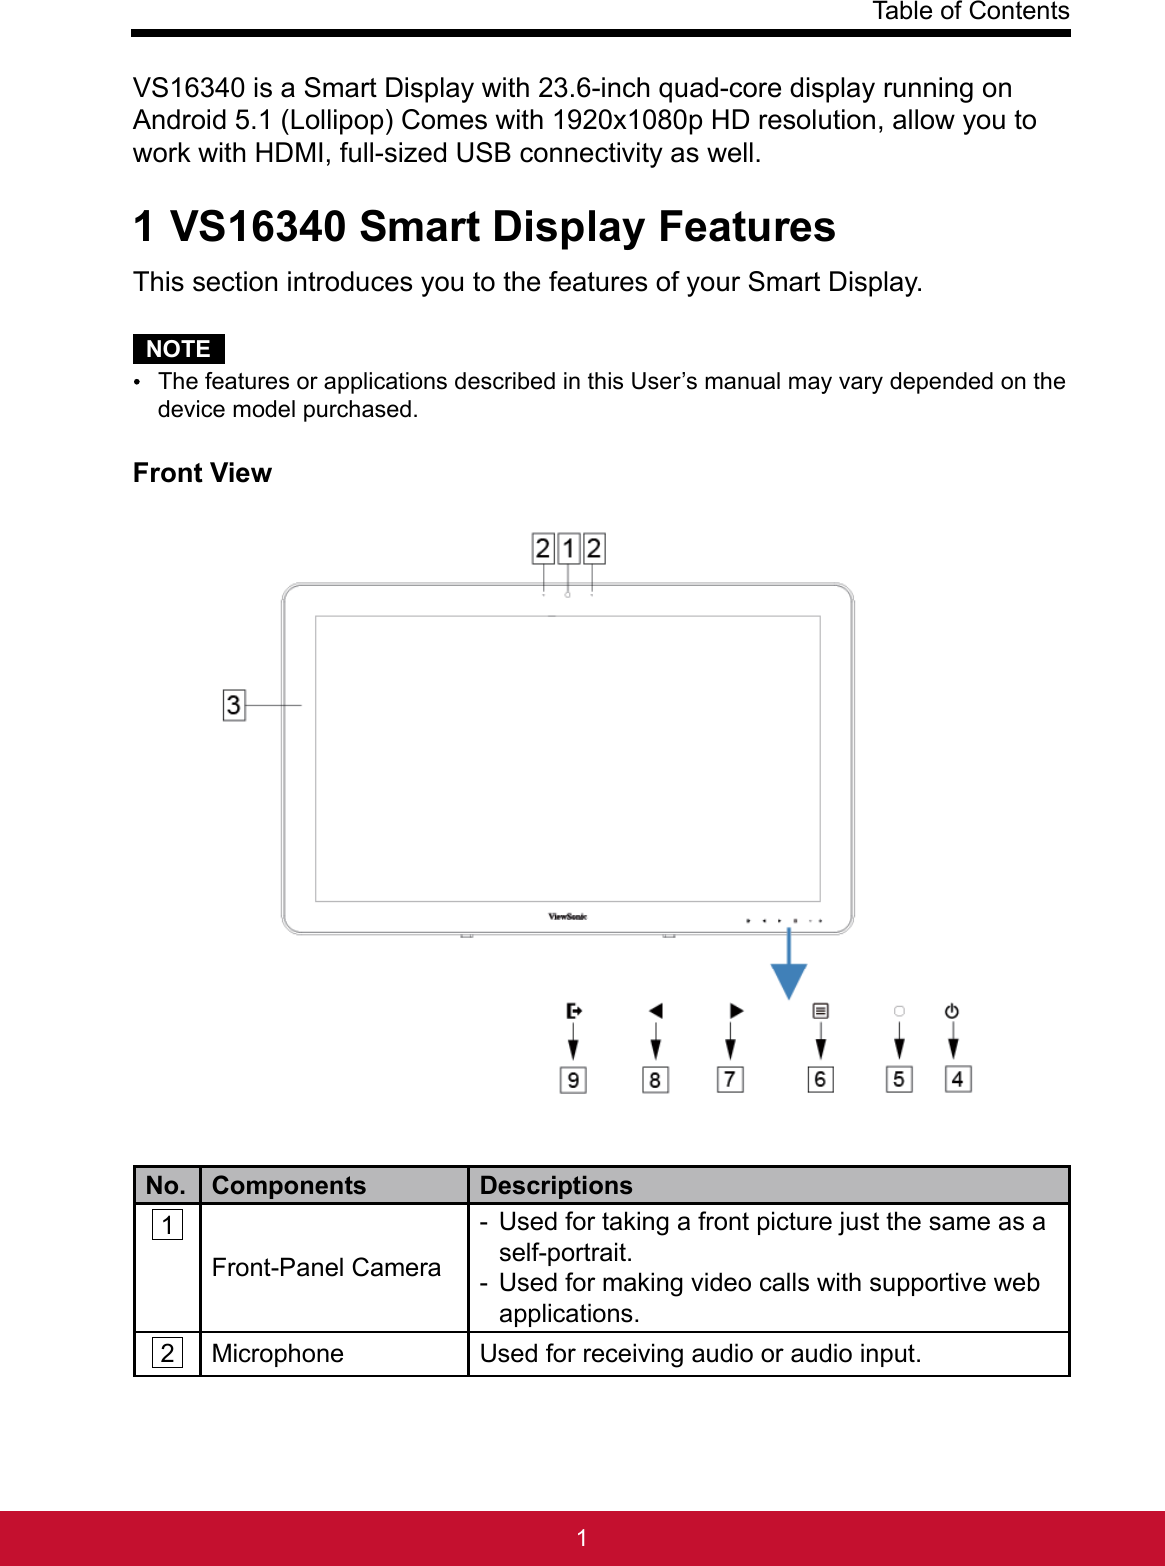 Table of Contents1VS16340 is a Smart Display with 23.6-inch quad-core display running onAndroid 5.1 (Lollipop) Comes with 1920x1080p HD resolution, allow you to work with HDMI, full-sized USB connectivity as well.1 VS16340 Smart Display FeaturesThis section introduces you to the features of your Smart Display.NOTE The features or applications described in this User’s manual may vary depended on the device model purchased.Front ViewNo.Components  Descriptions1Front-Panel Camera- Used for taking a front picture just the same as a self-portrait. - Used for making video calls with supportive web applications.2 Microphone Used for receiving audio or audio input.